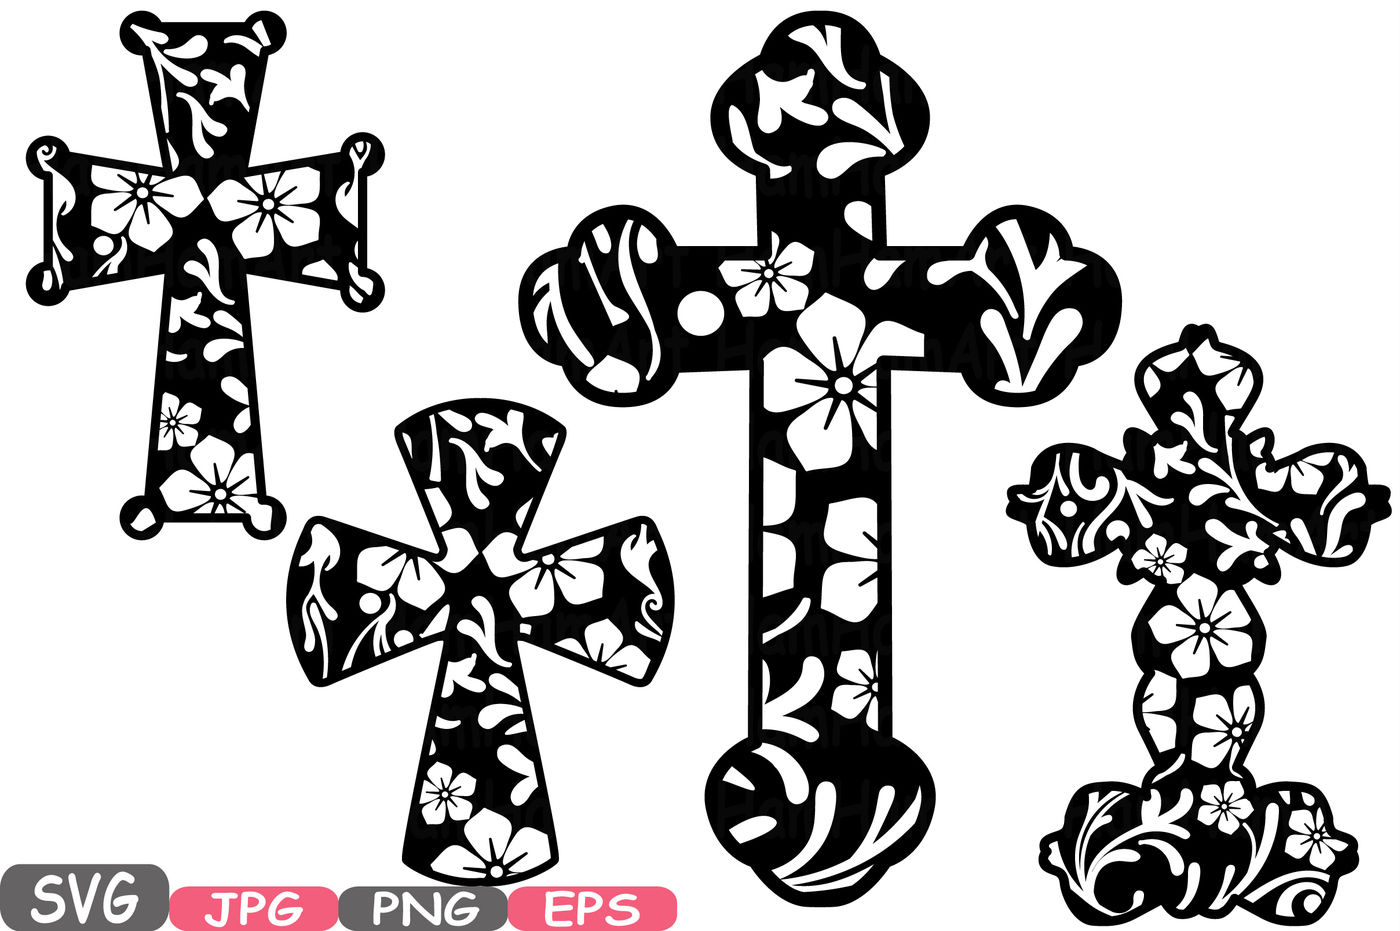 Christian Cross Svg Silhouette Cutting Files Jesus Cross Religious Monogram Clipart Cricut Bible Sign Icons God Design Cameo Vinyl 512s By Hamhamart Thehungryjpeg Com,Traditional South Indian Traditional Ruby Necklace Designs